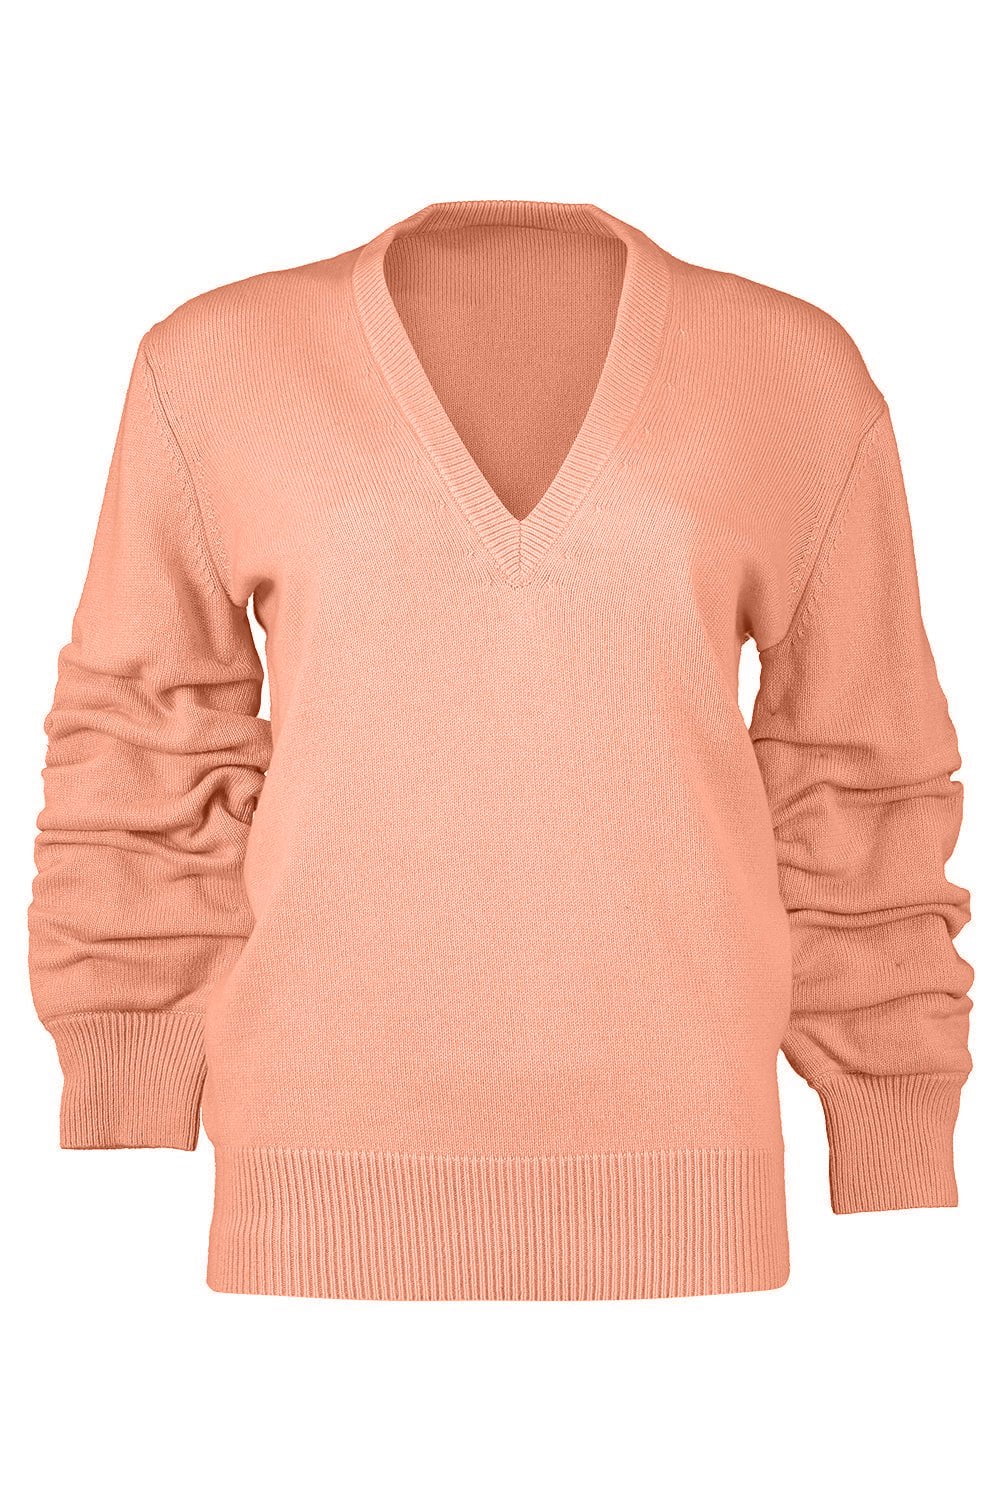 Crushed Sleeve Sweater - Melon CLOTHINGTOPKNITS MICHAEL KORS COLLECTION   